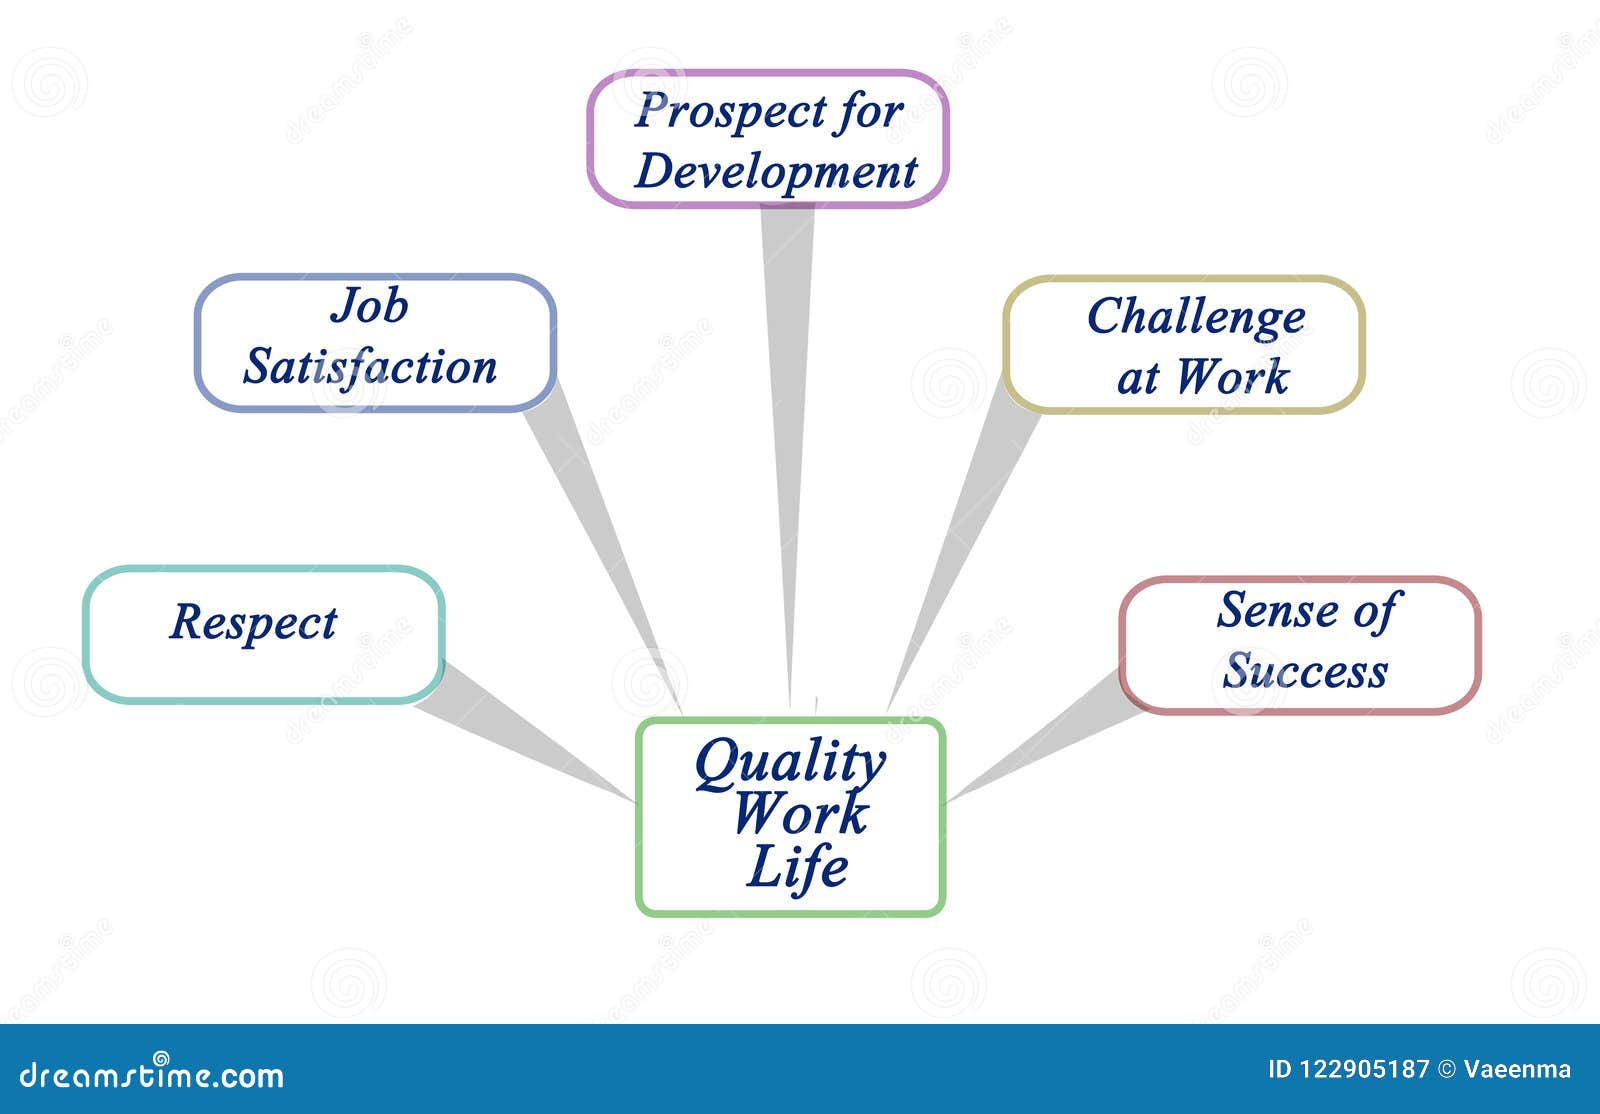 research paper on quality of work life